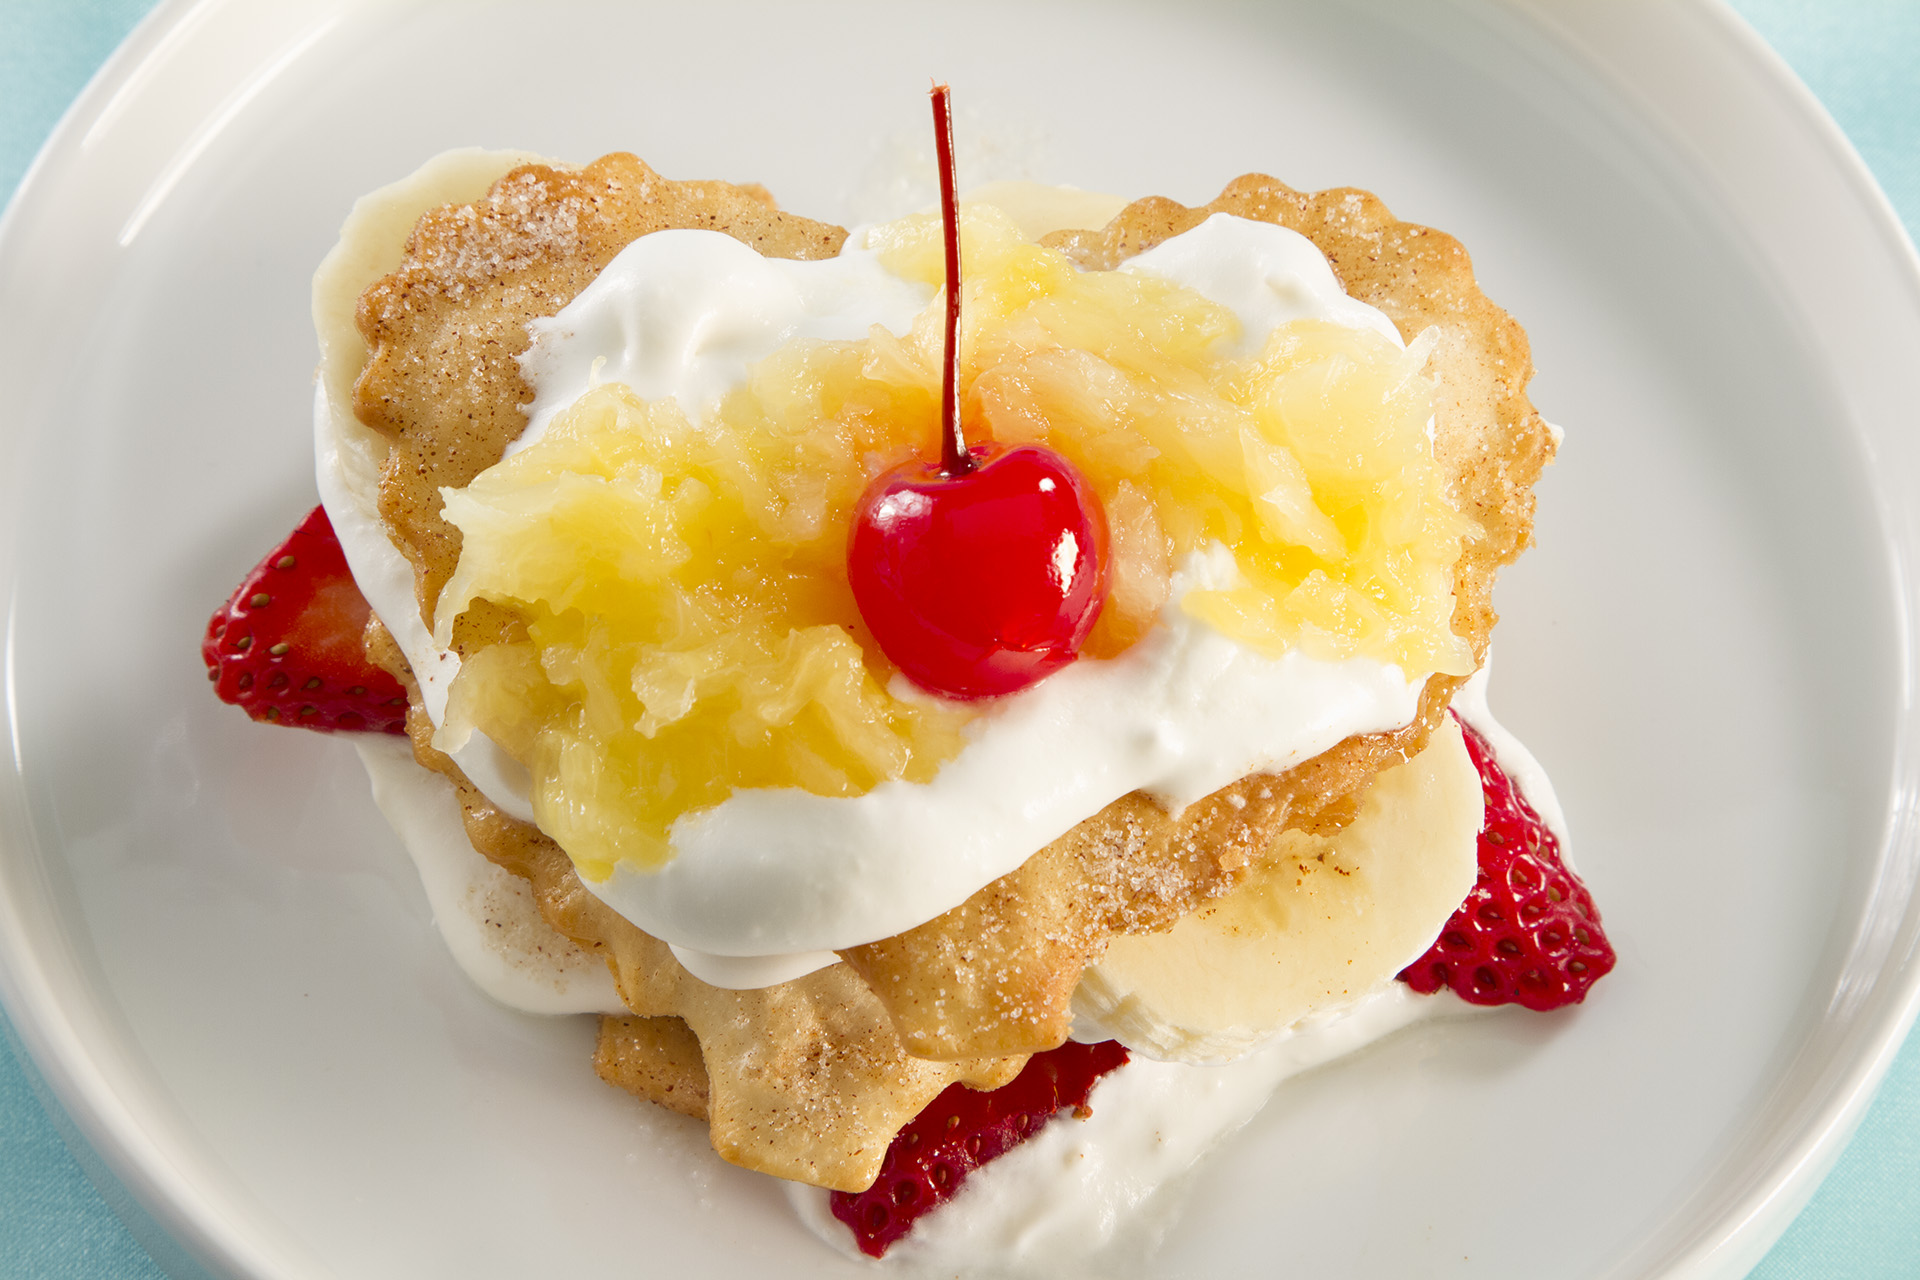 This is a great way to dress up a simple banana split and make it fit for a Dutchess!